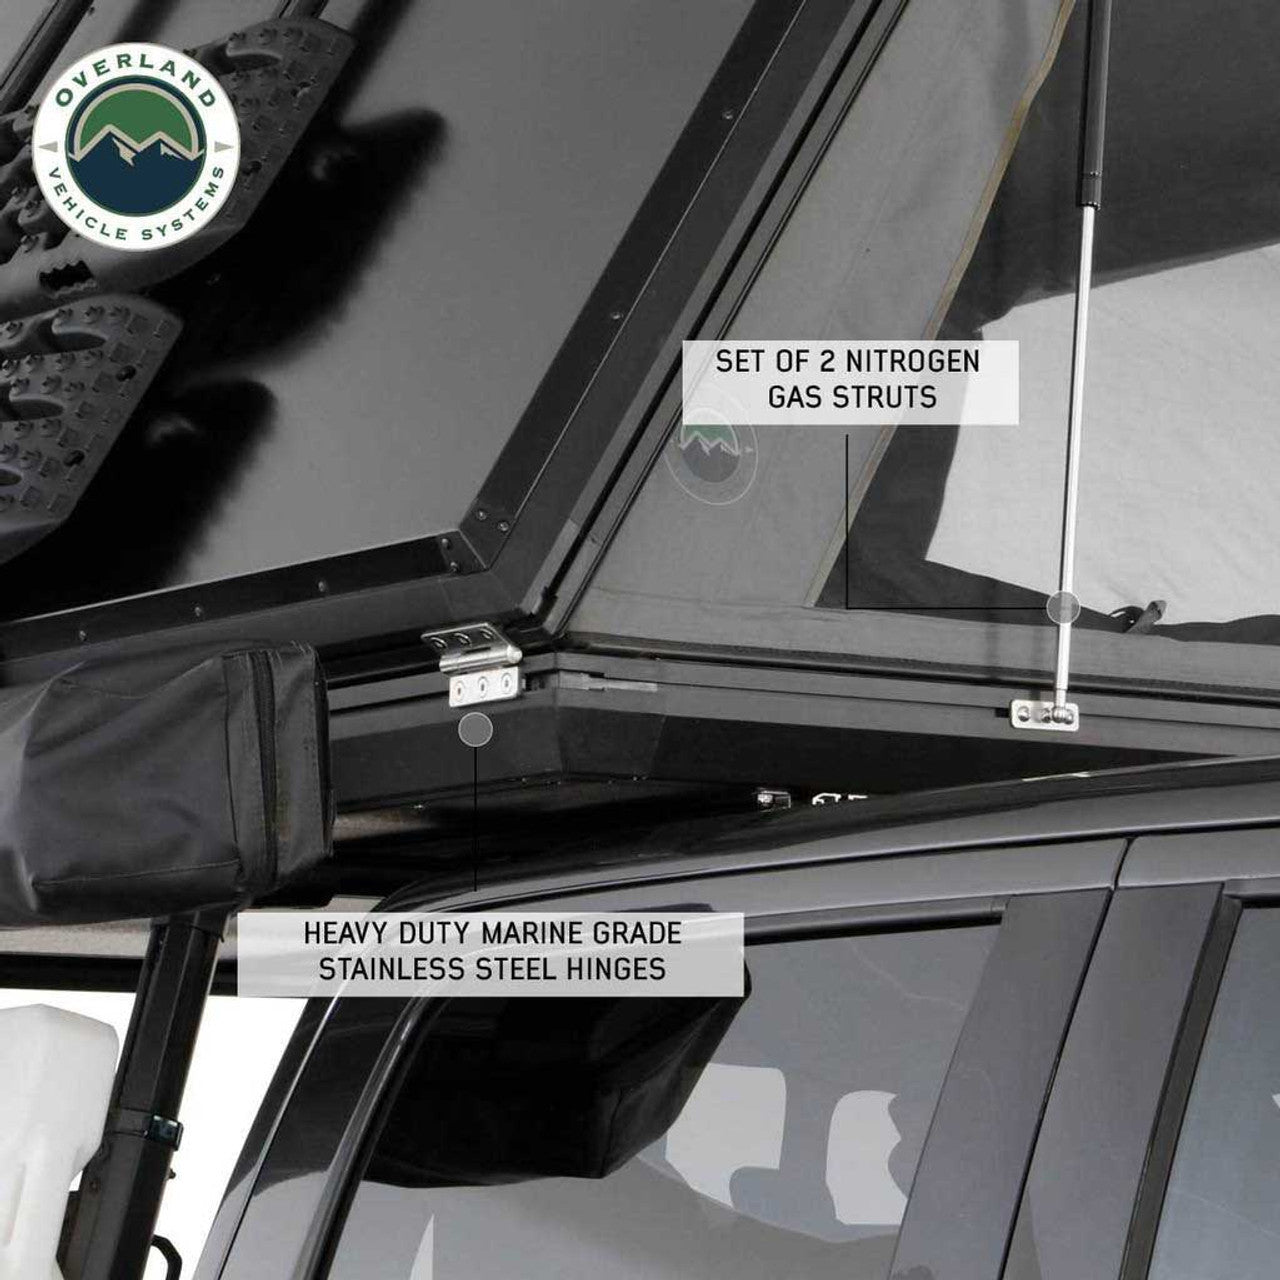 Overland Vehicle Systems Sidewinder Roof Top Tent 18109901